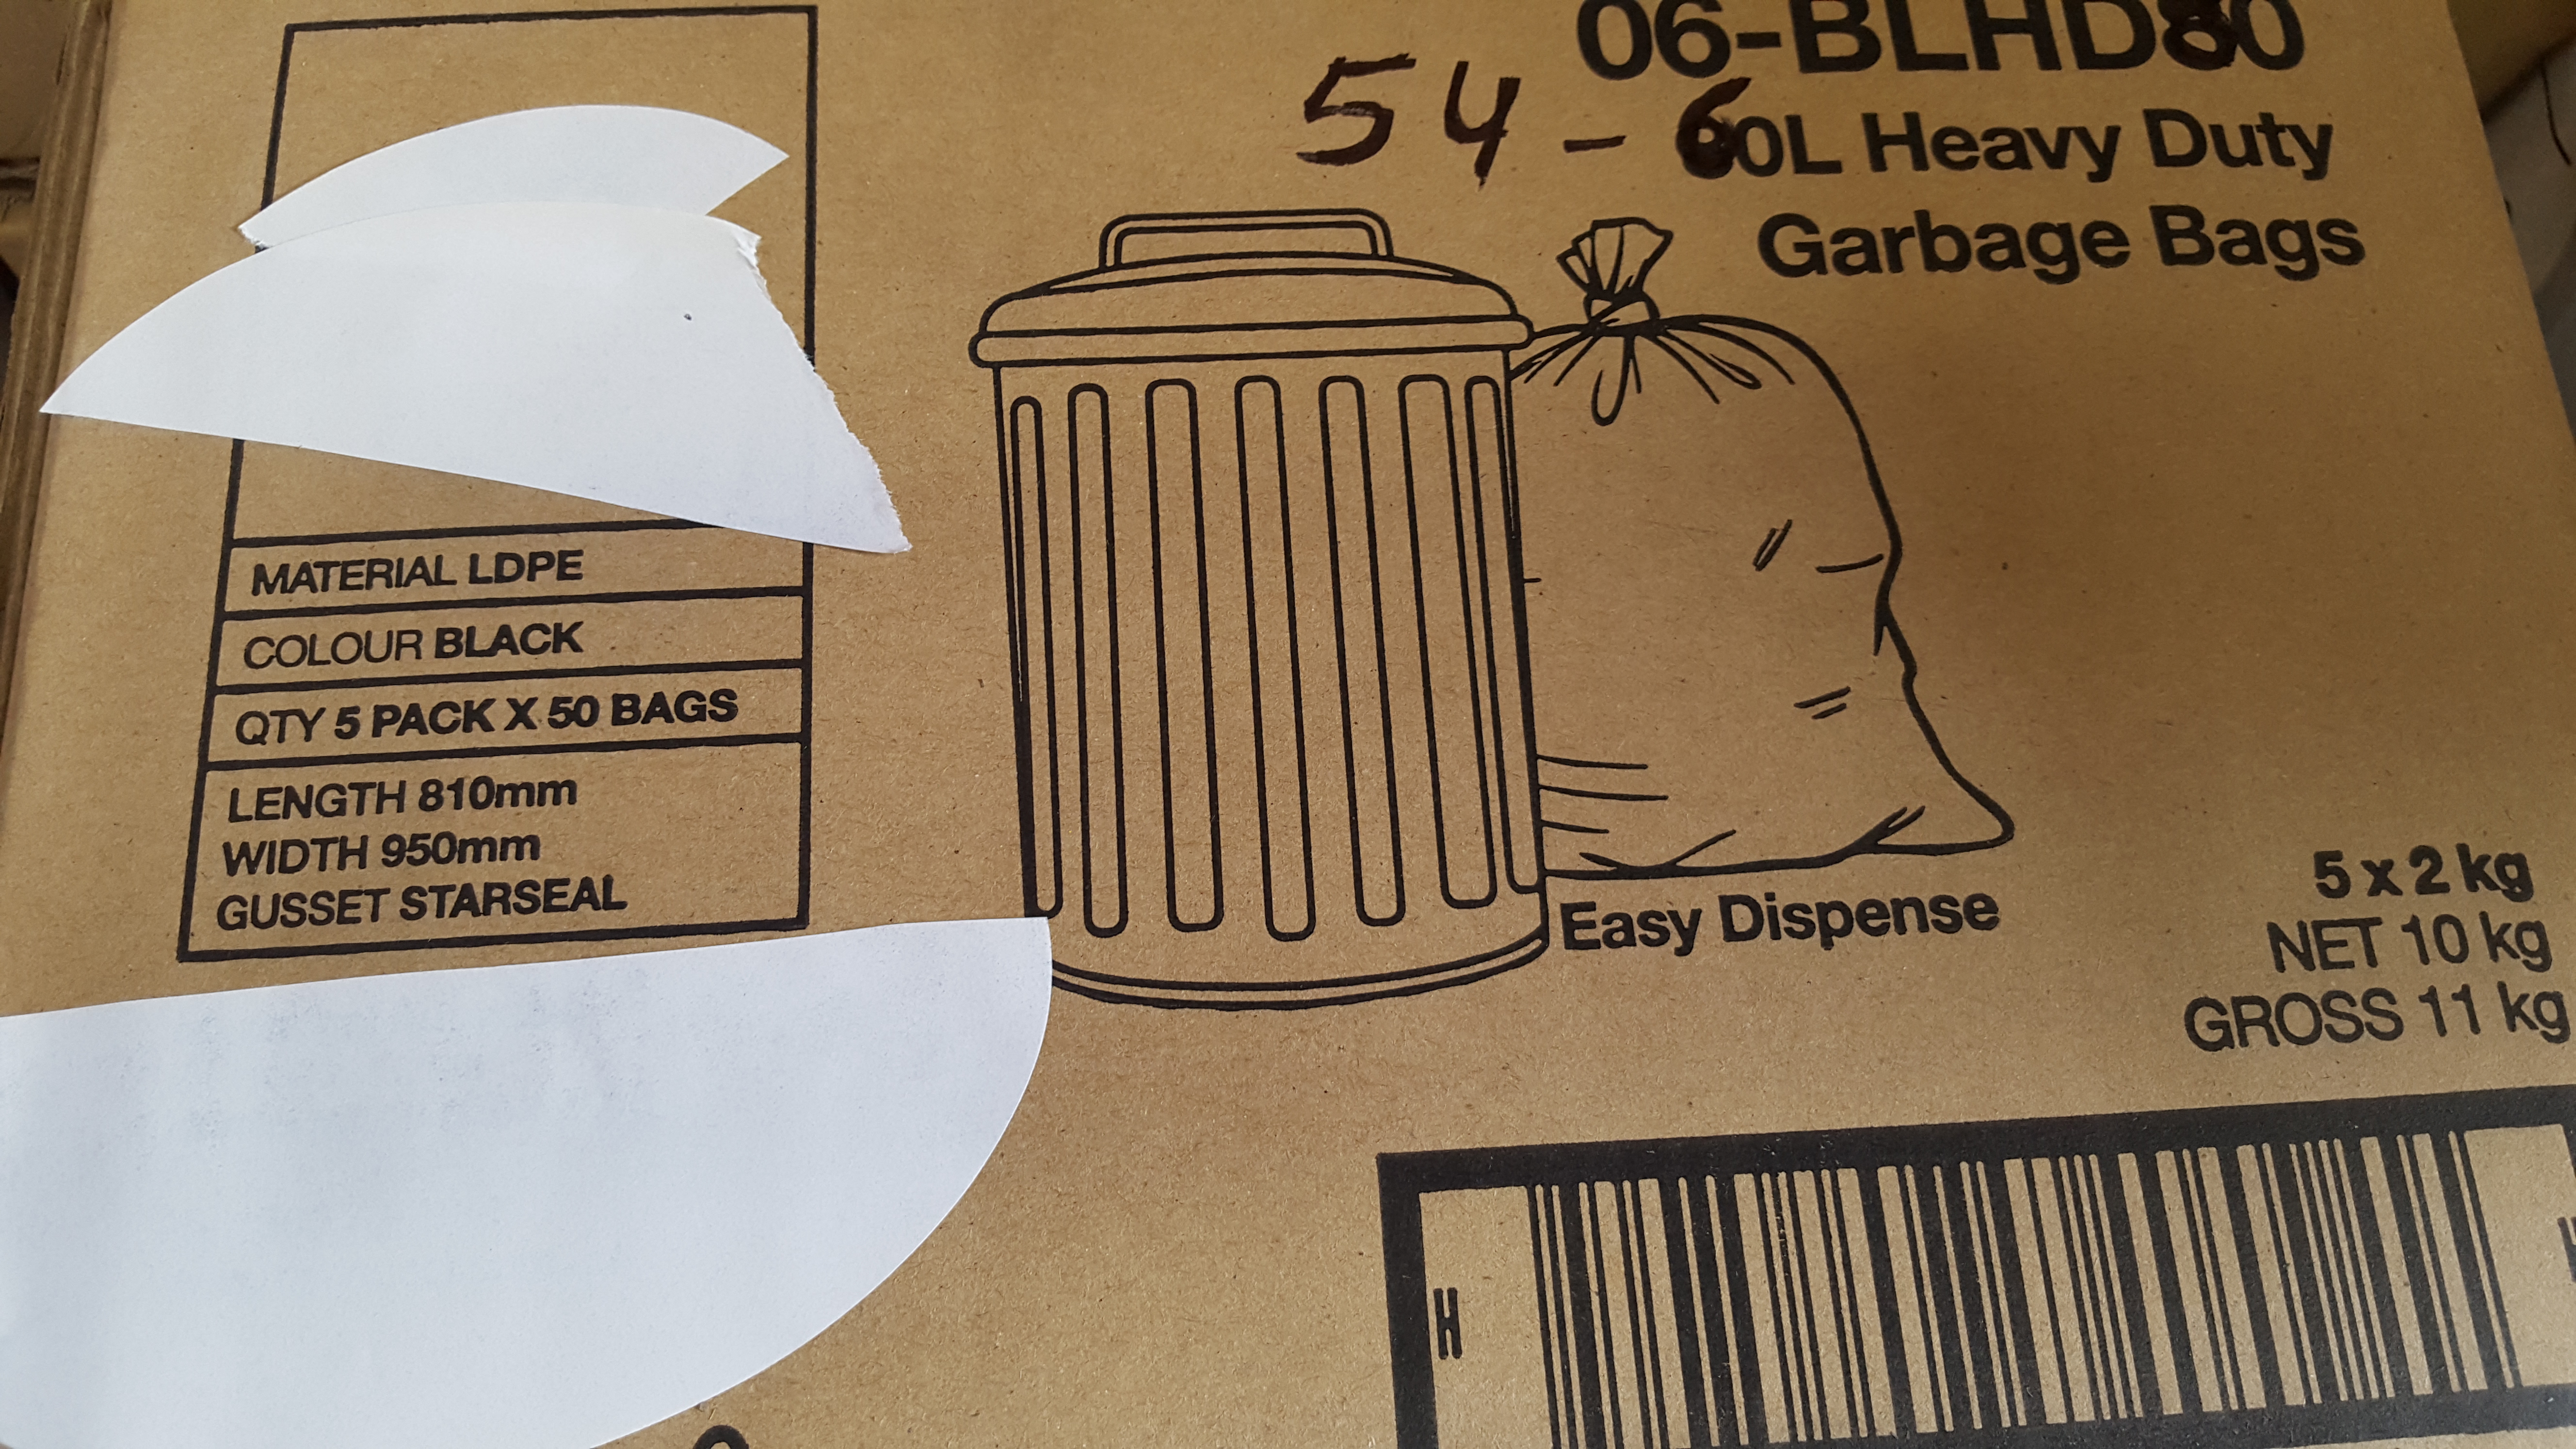 GARBAGE BAGS 54/60 LITRE BLACK/600PC - Click Image to Close